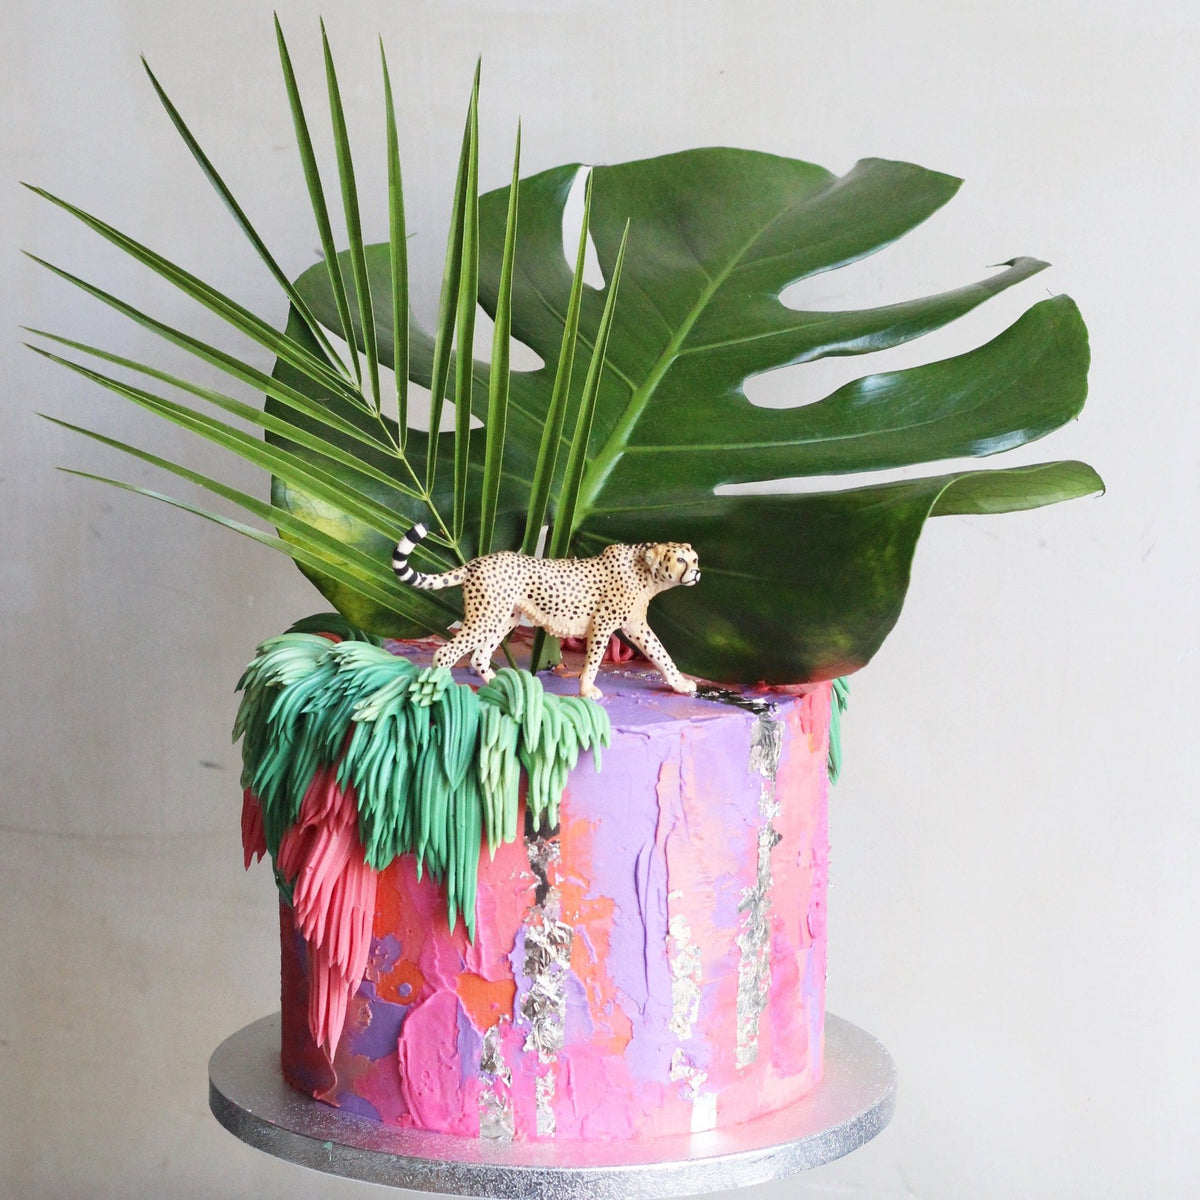 Utopia Cake - Bold colored icing and shaggy cream adorned with green leaves and a cheetah topper.